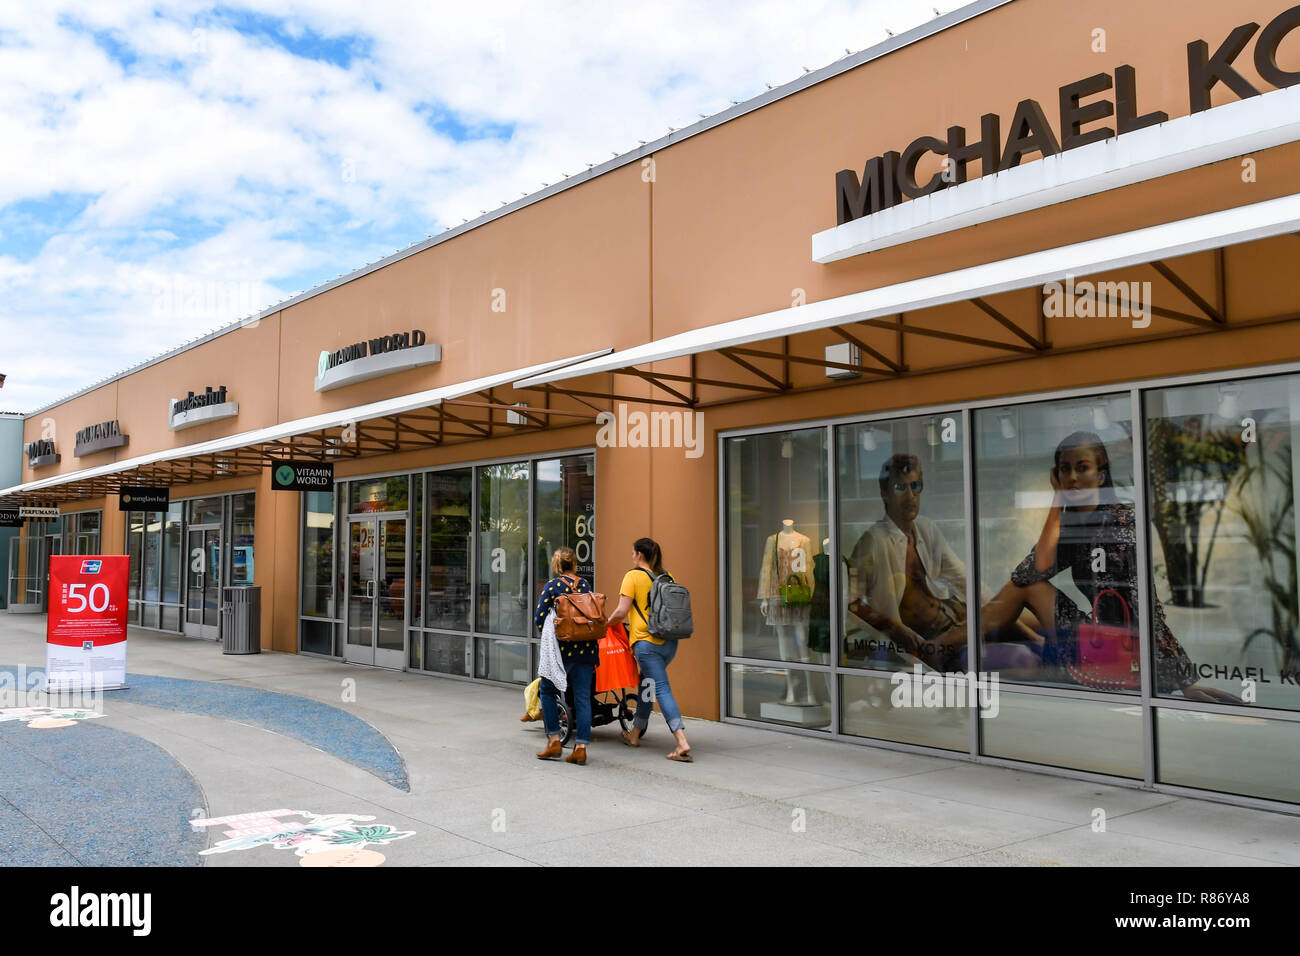 Hollister Seattle Premium Outlets Hotsell, SAVE 50%.